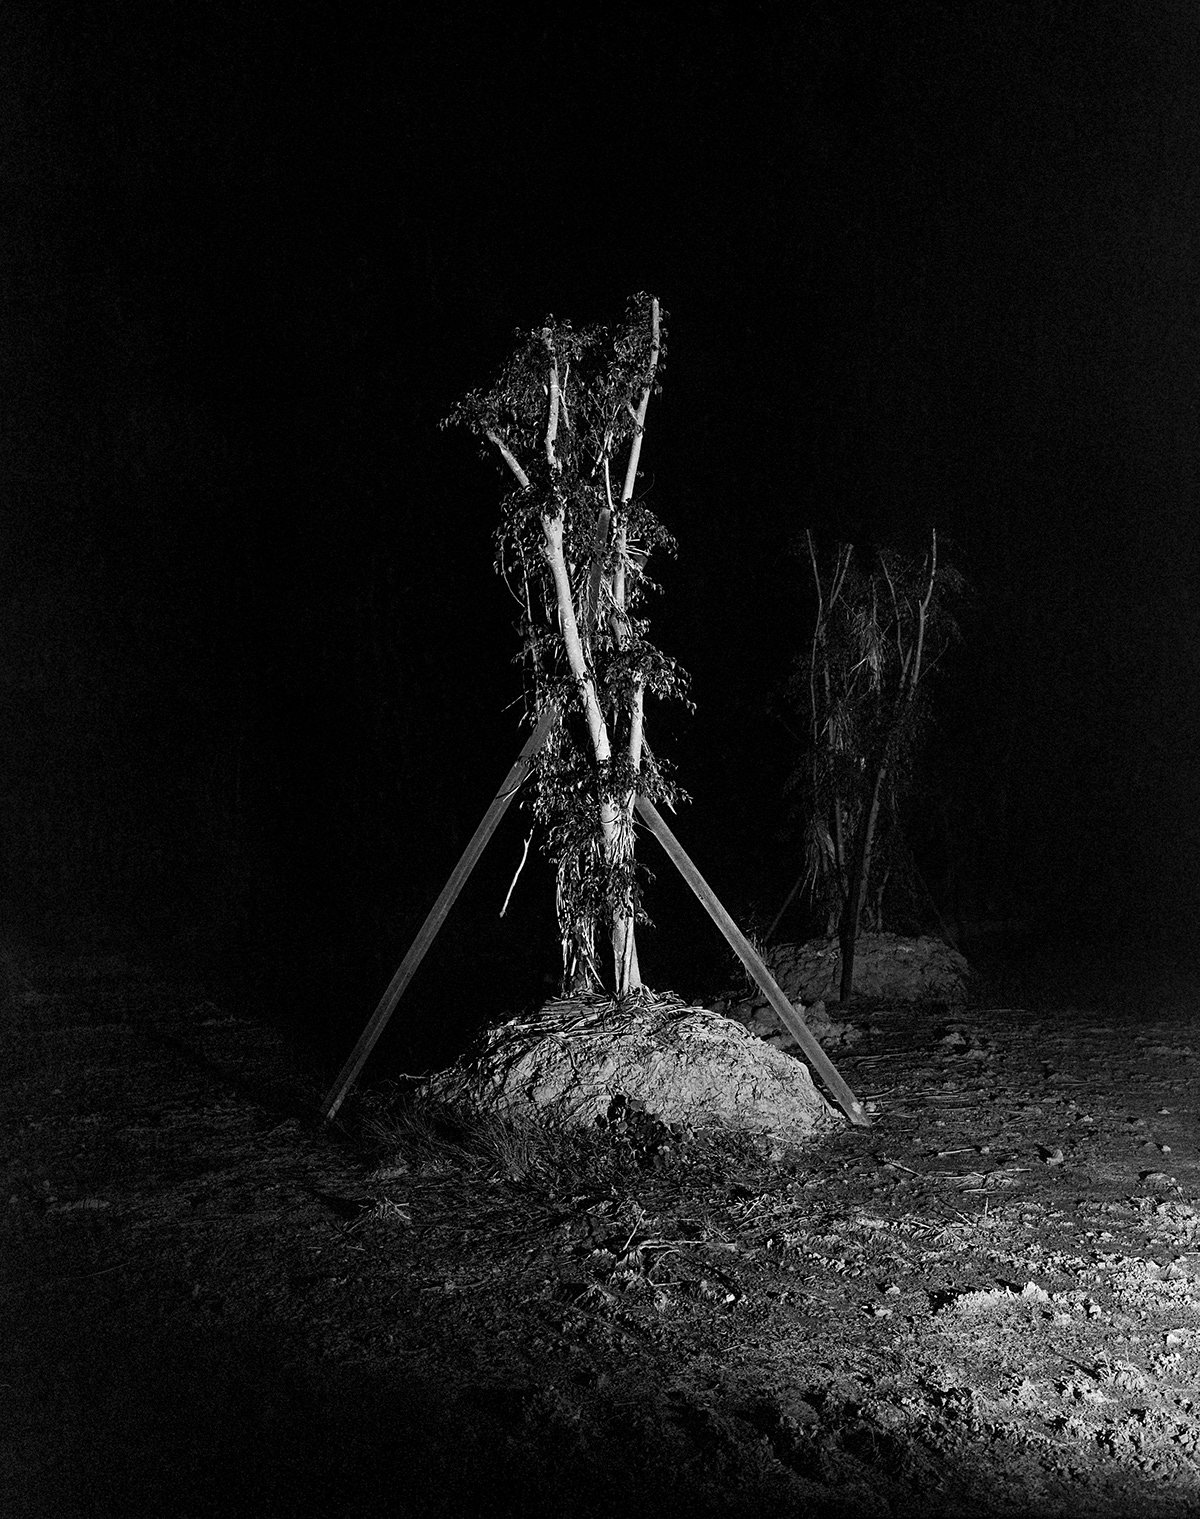 Sustainability recycling Totem pre-conventional integral theory theory of everything crying for earth dry kiss mamiya 7 silver print medium format camera nikon coolscan 9000